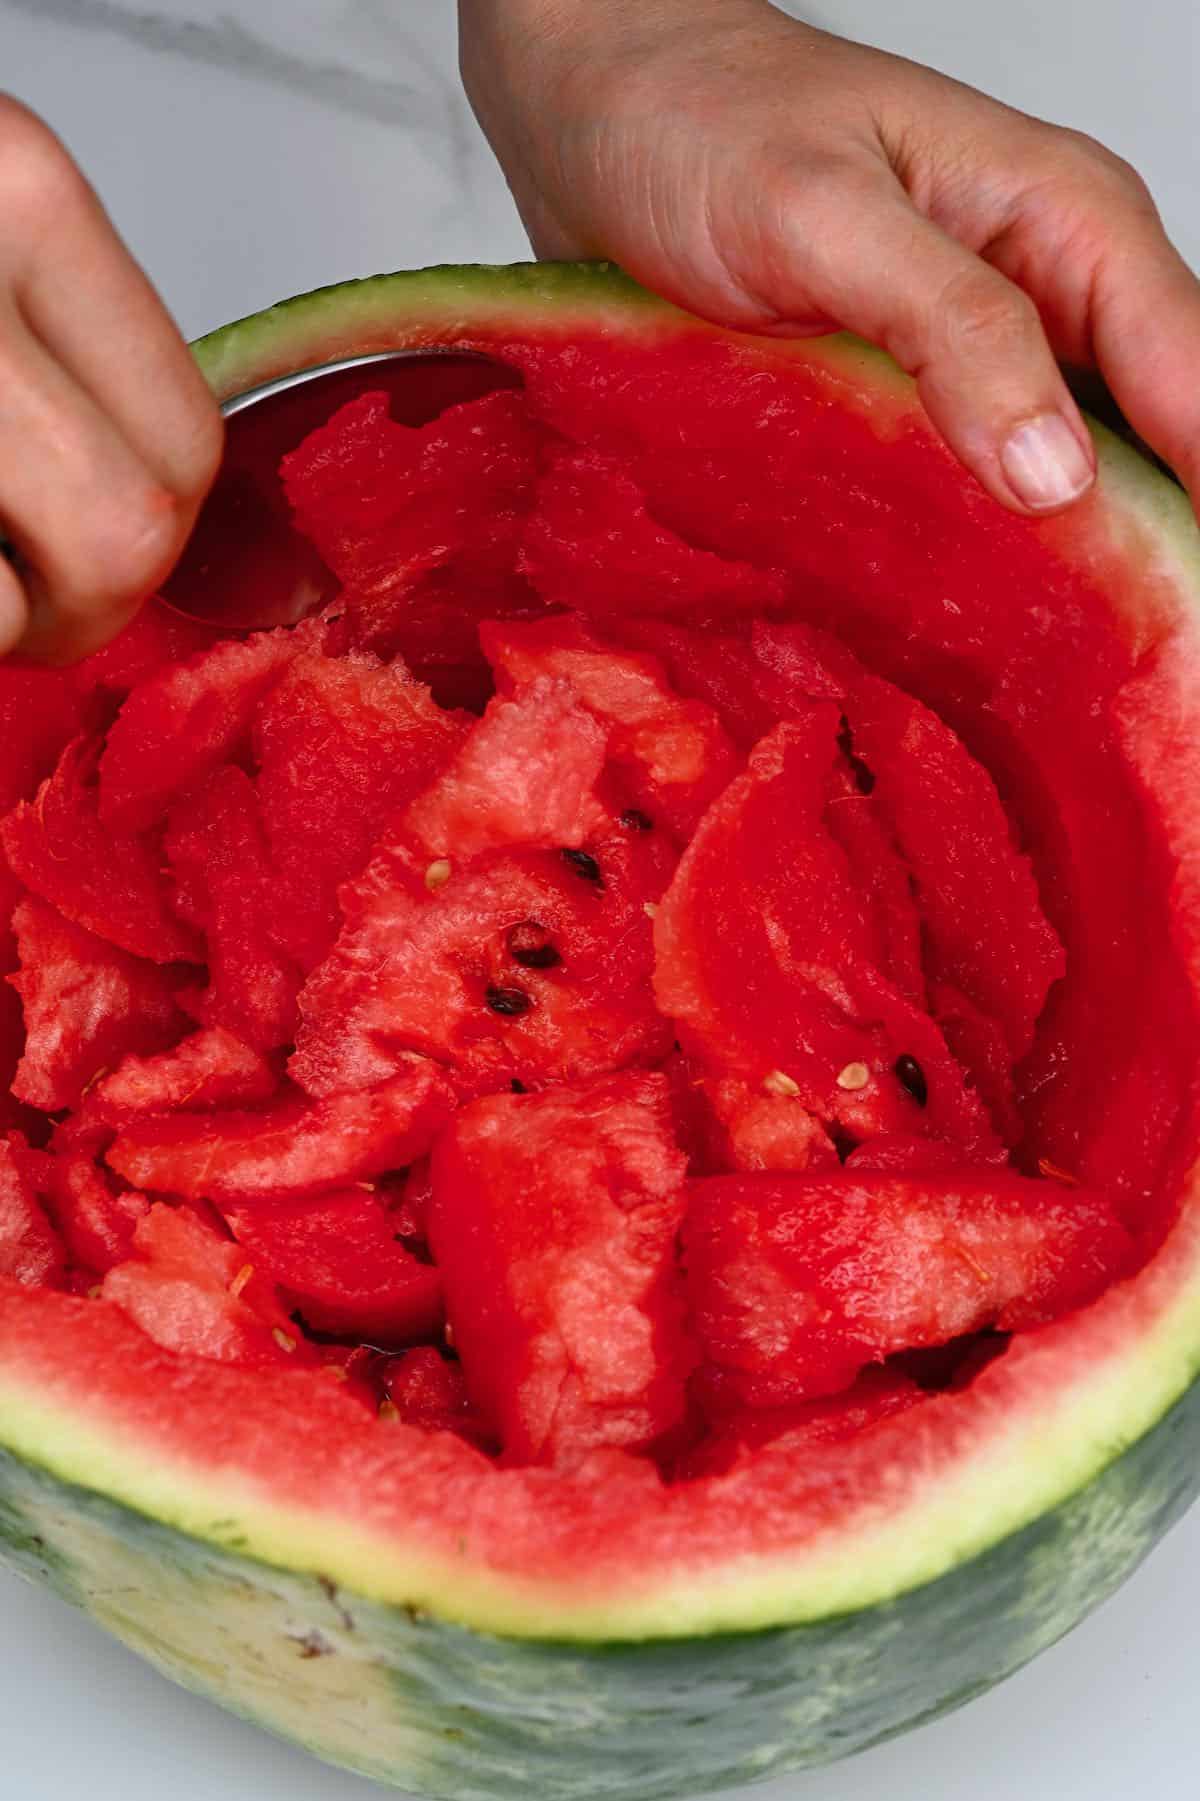 Removing the flesh of a watermelon